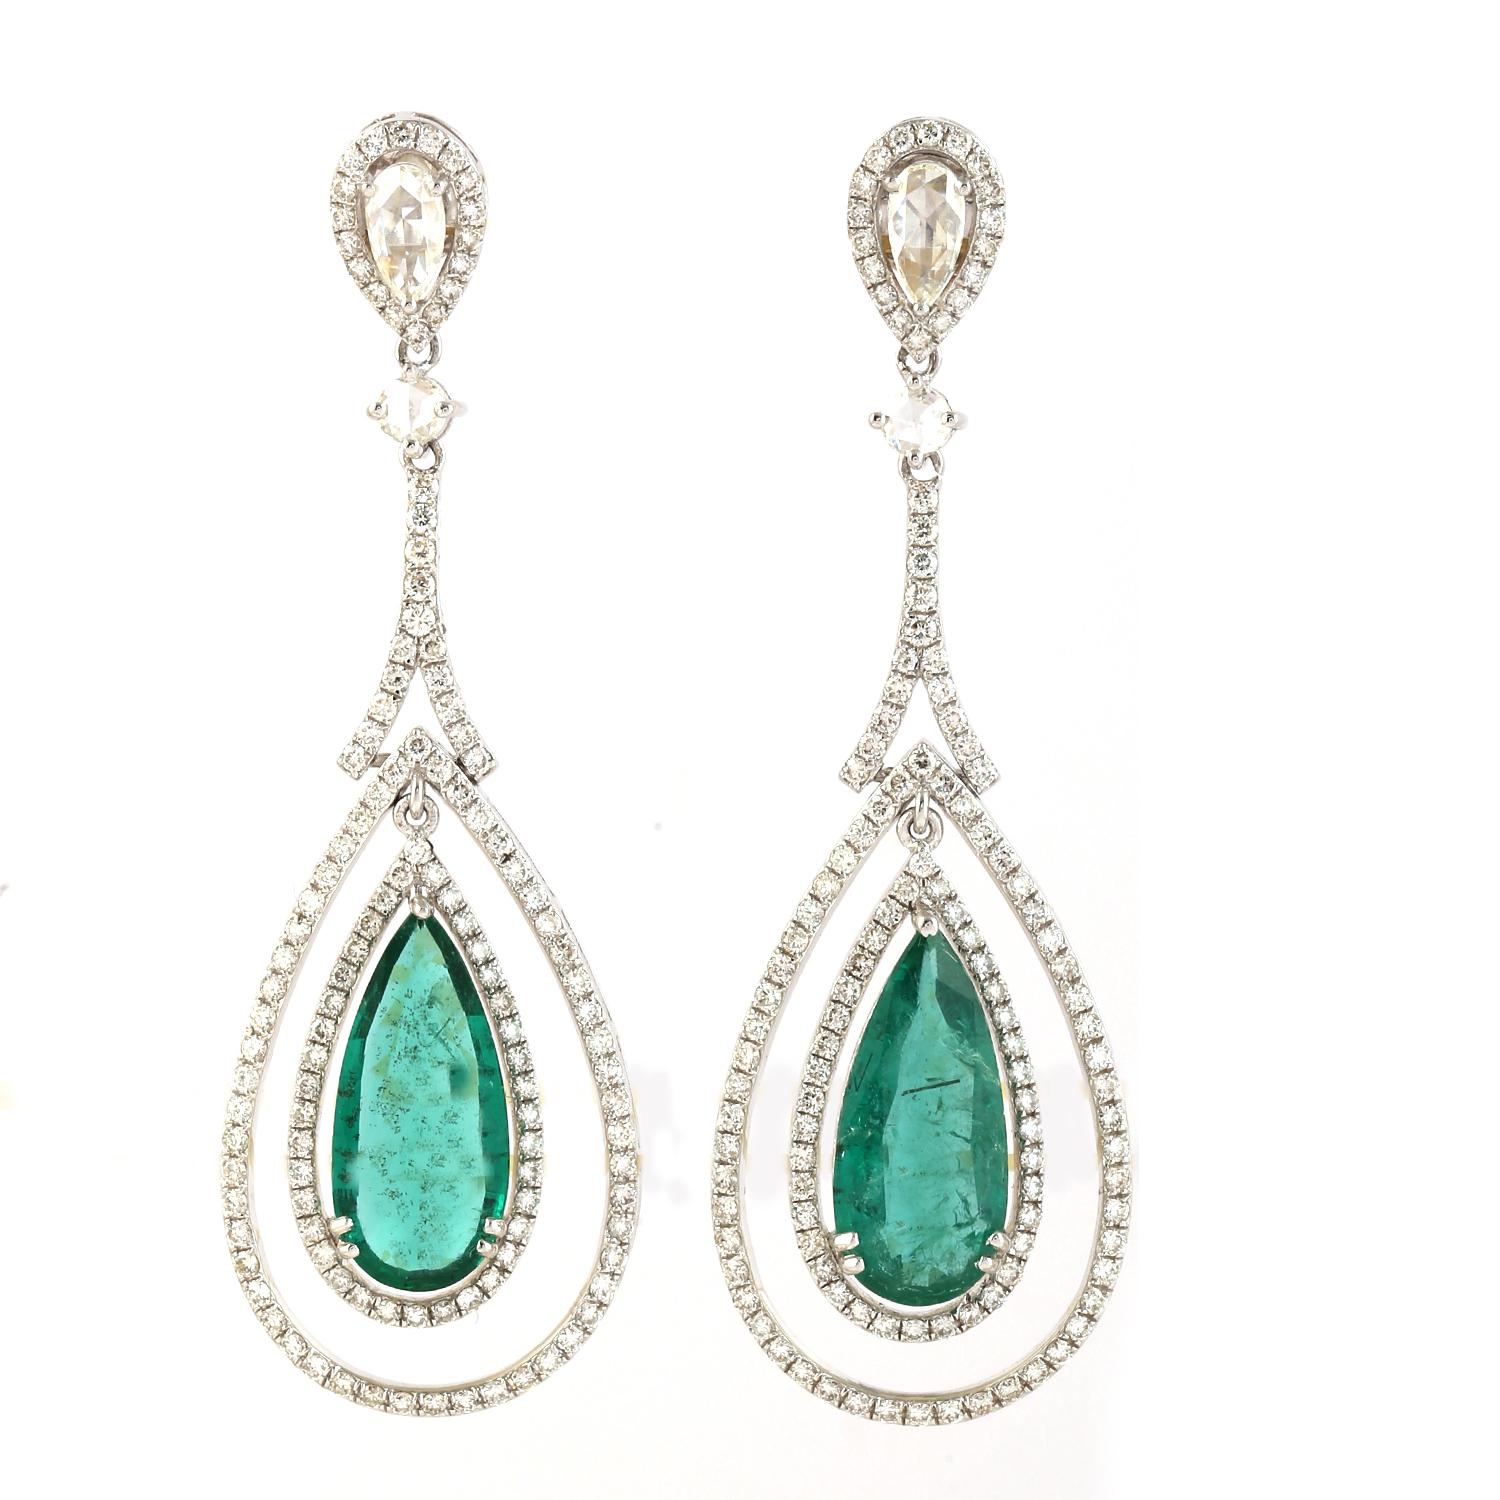 Contemporary 6.06ct pear Shaped Emerald Dangle Earrings Encircled In Diamonds In 18k Gold For Sale